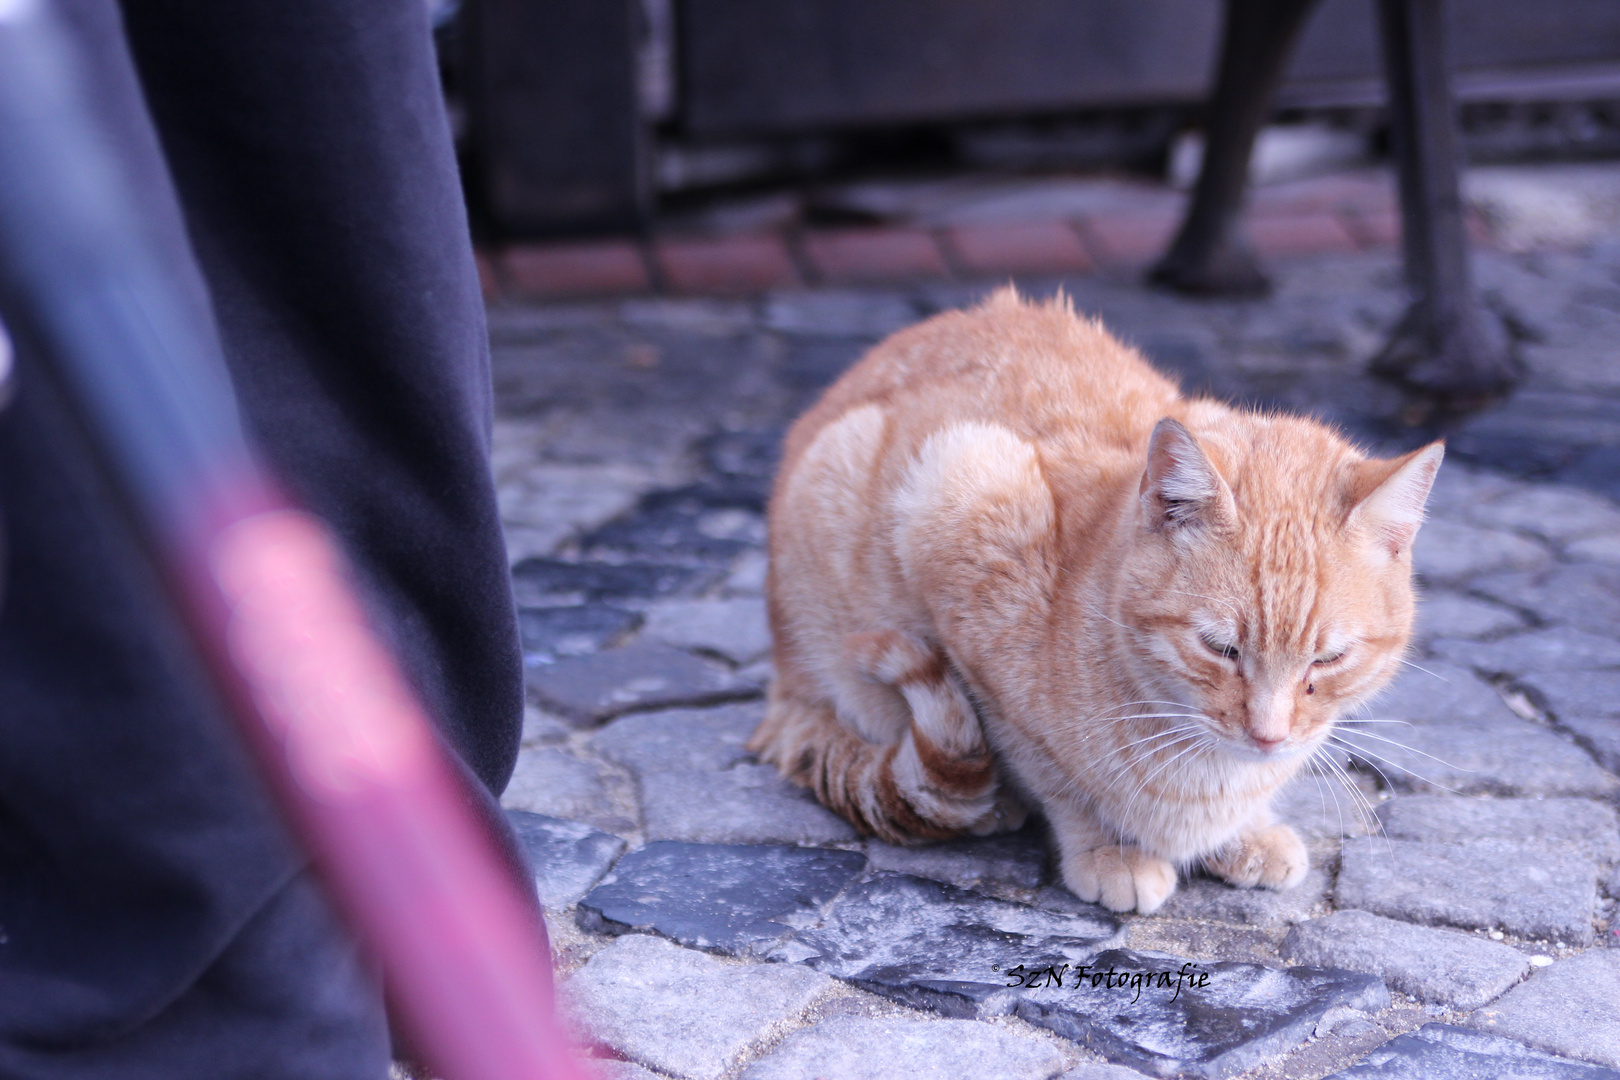 a cat in istanBooL